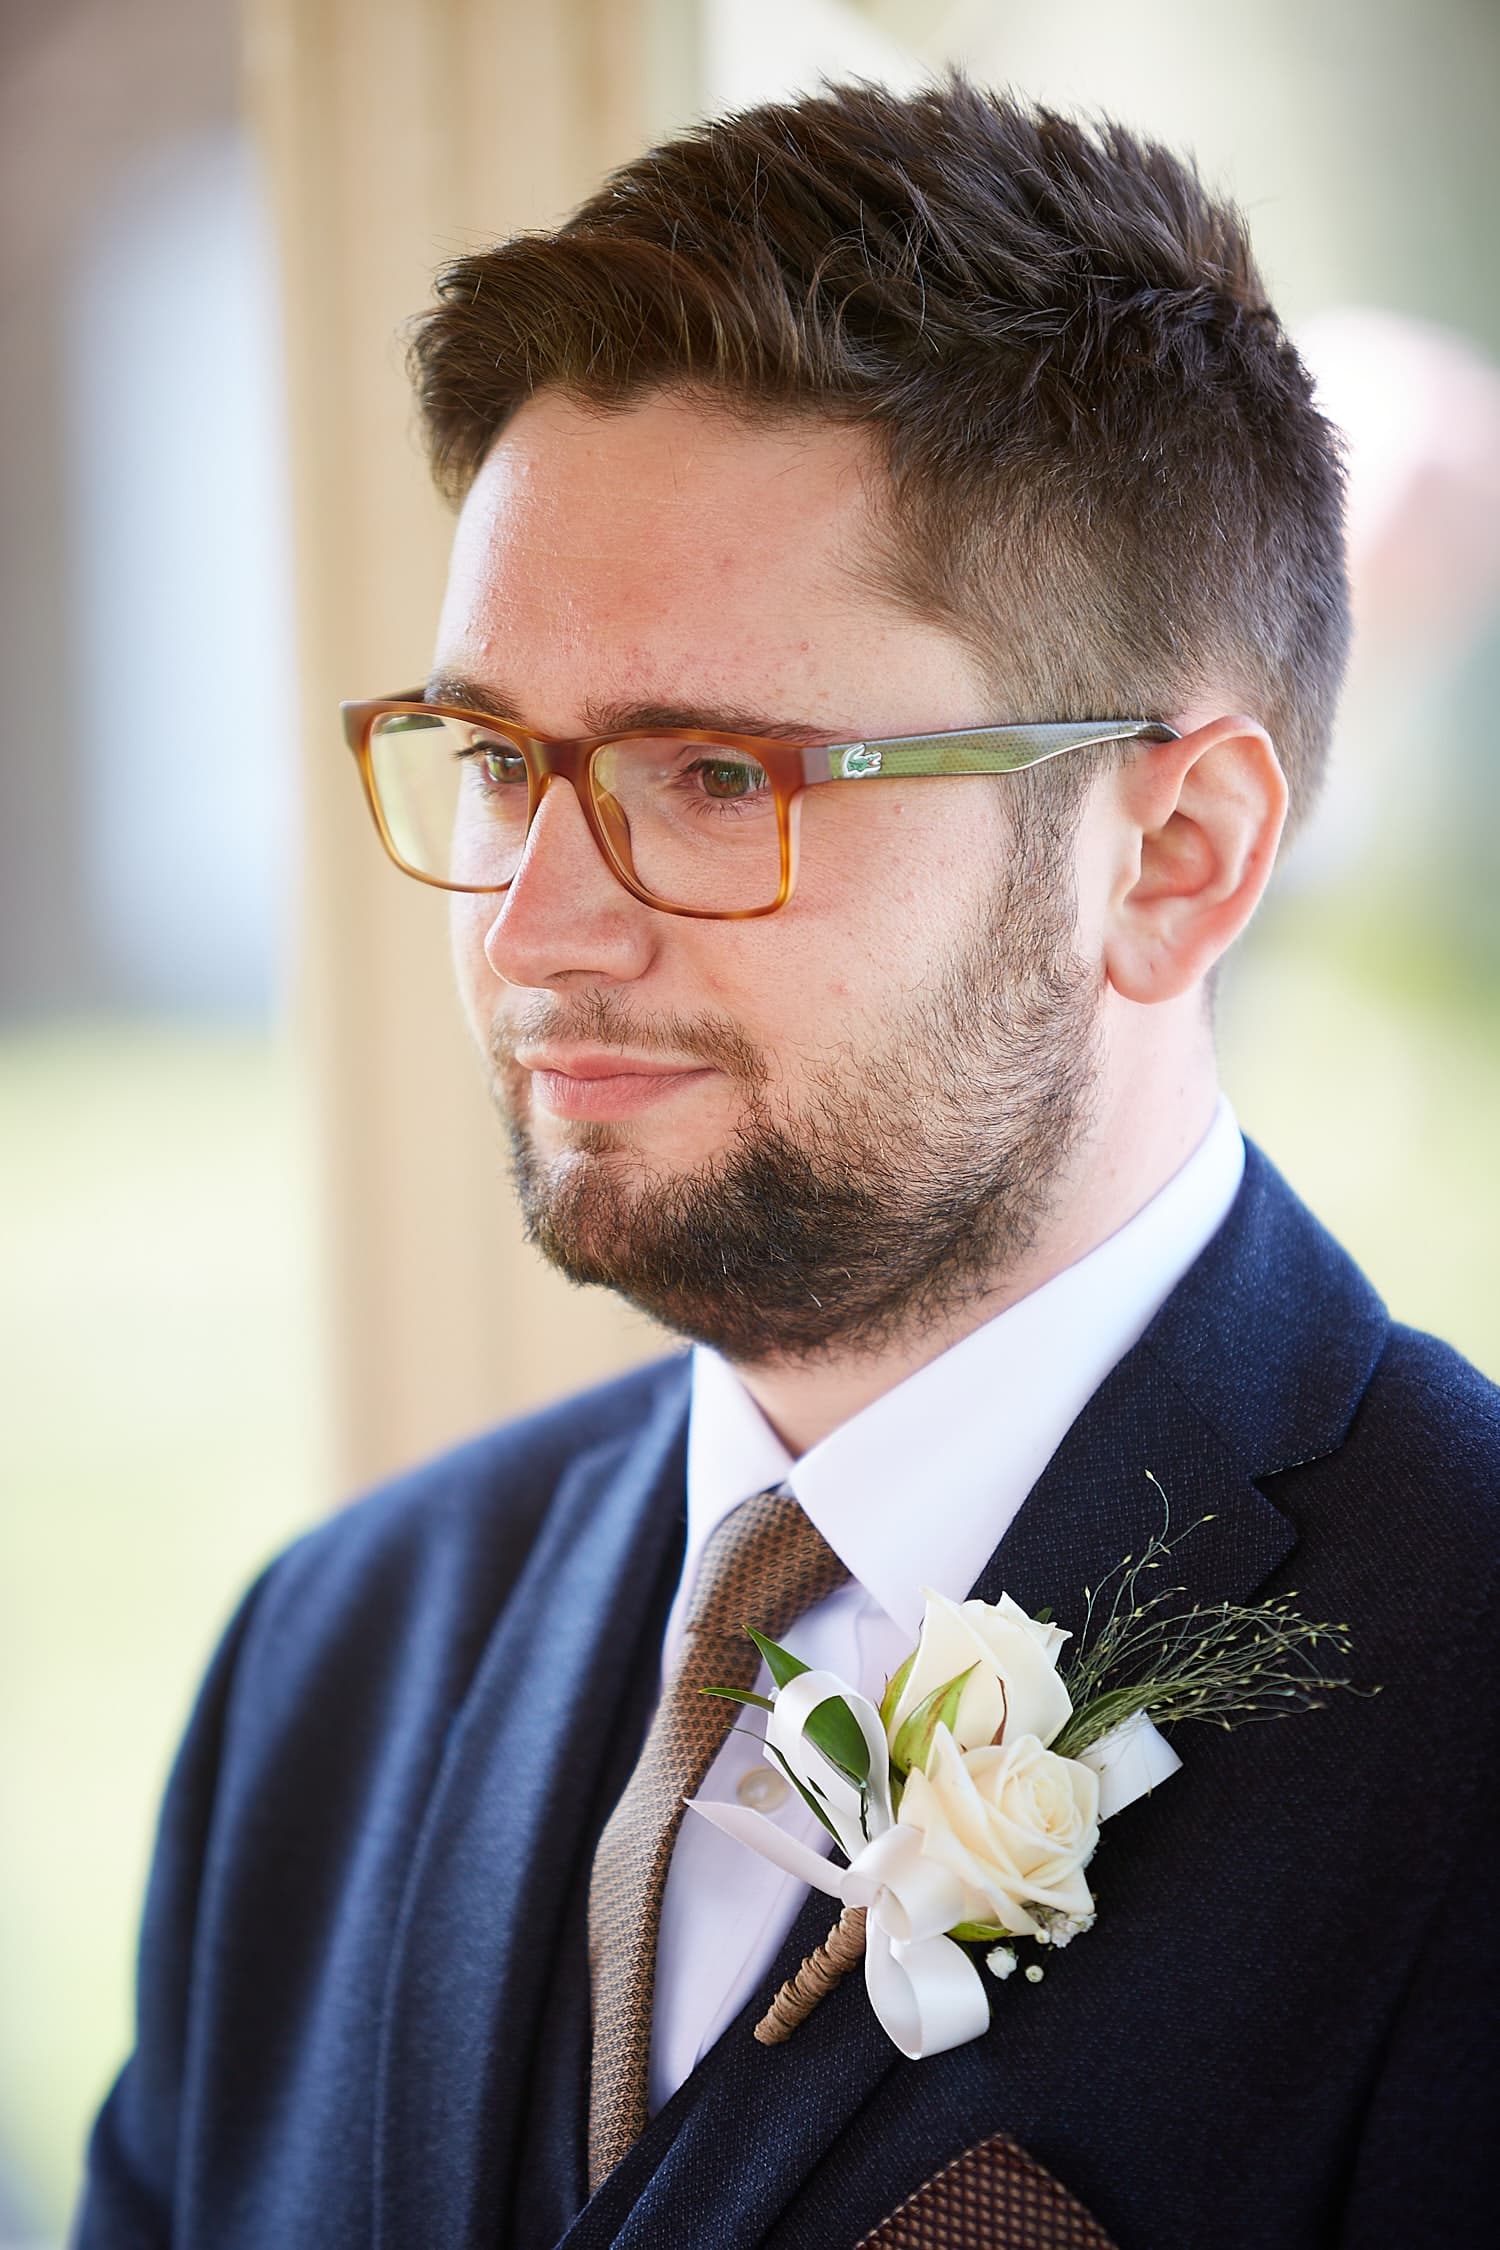 A nervous groom waiting for his bride to walk down the aisle